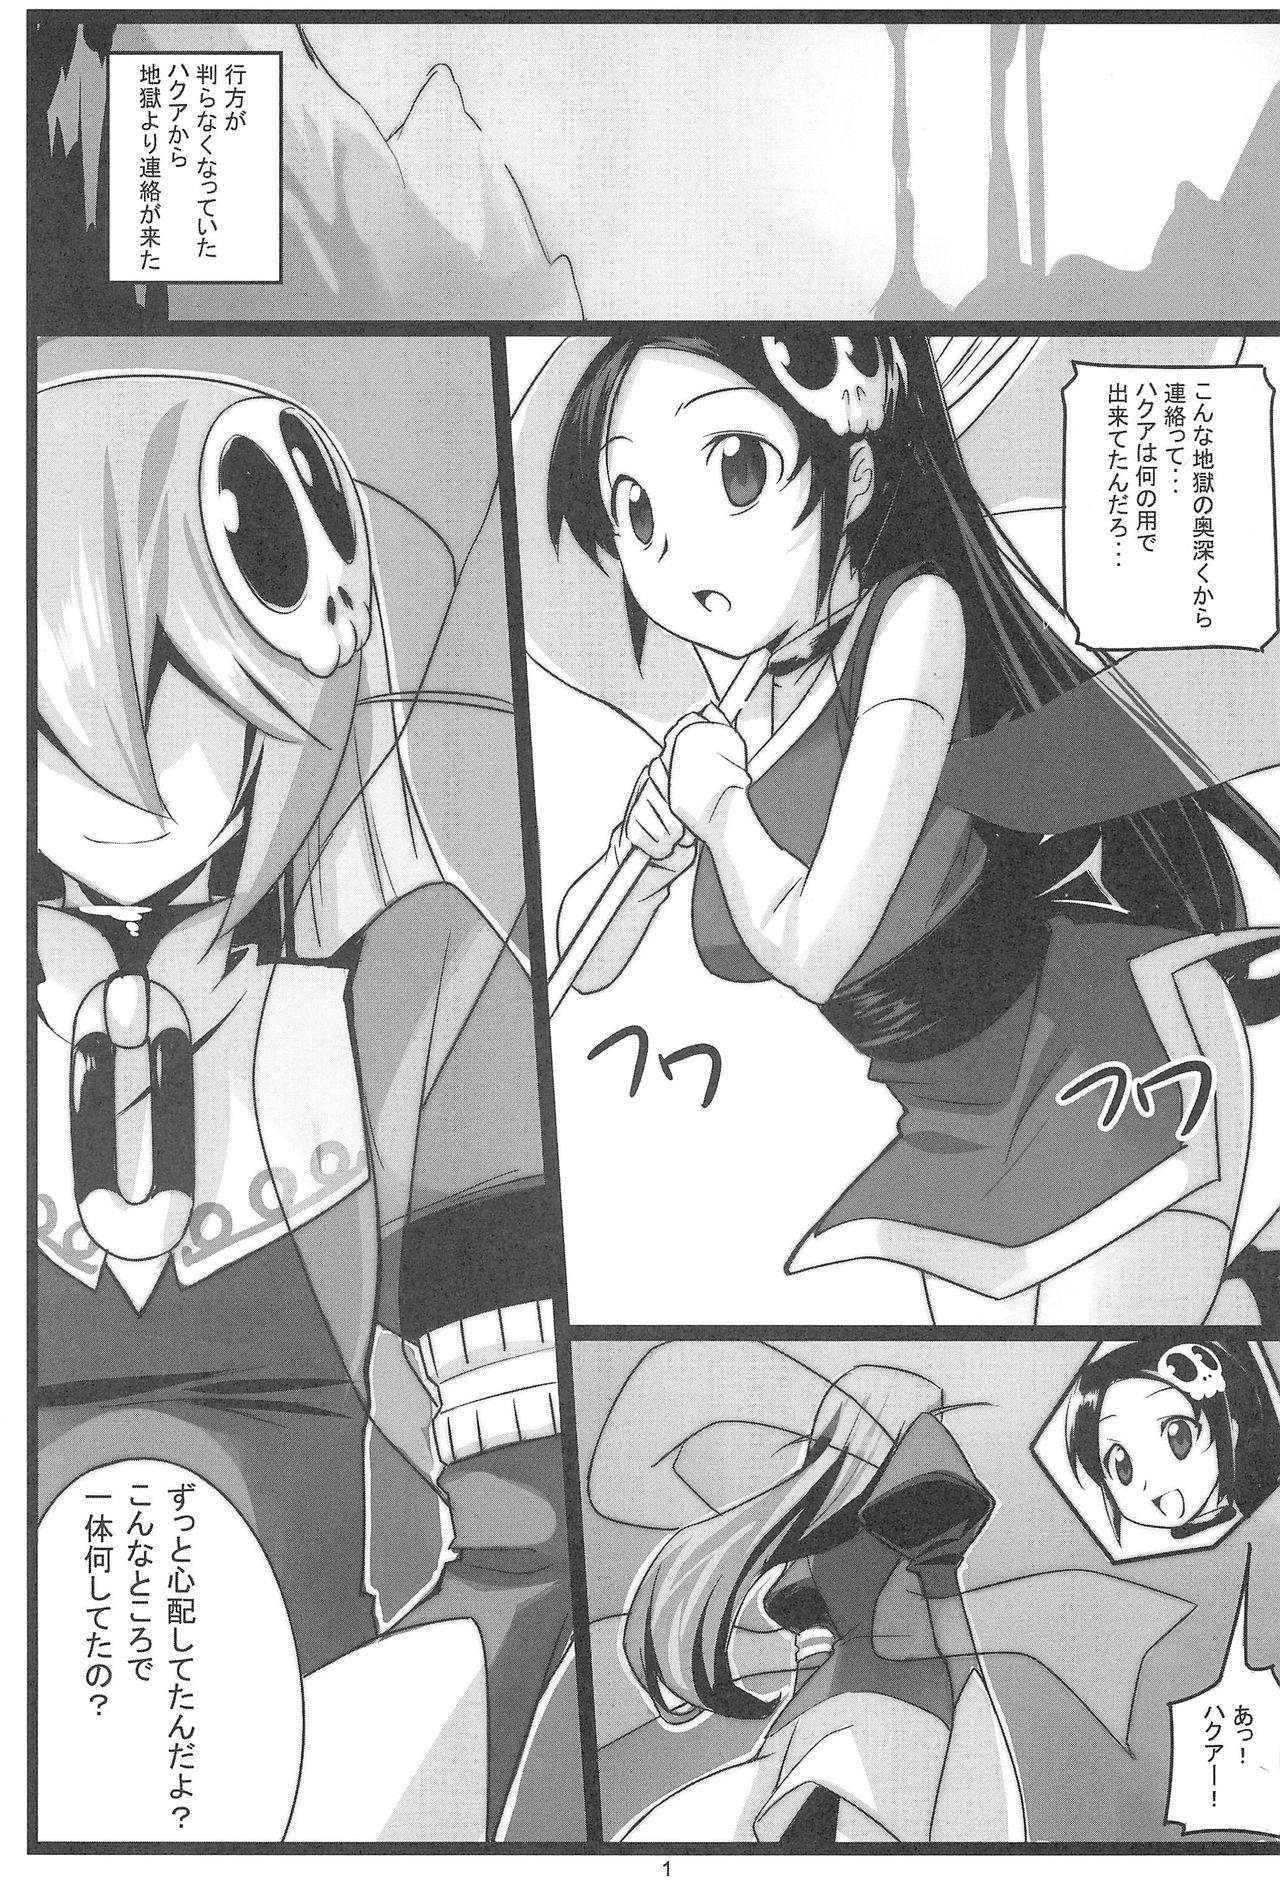 Sislovesme SWEET TRAP TWIN - The world god only knows Culo Grande - Page 5